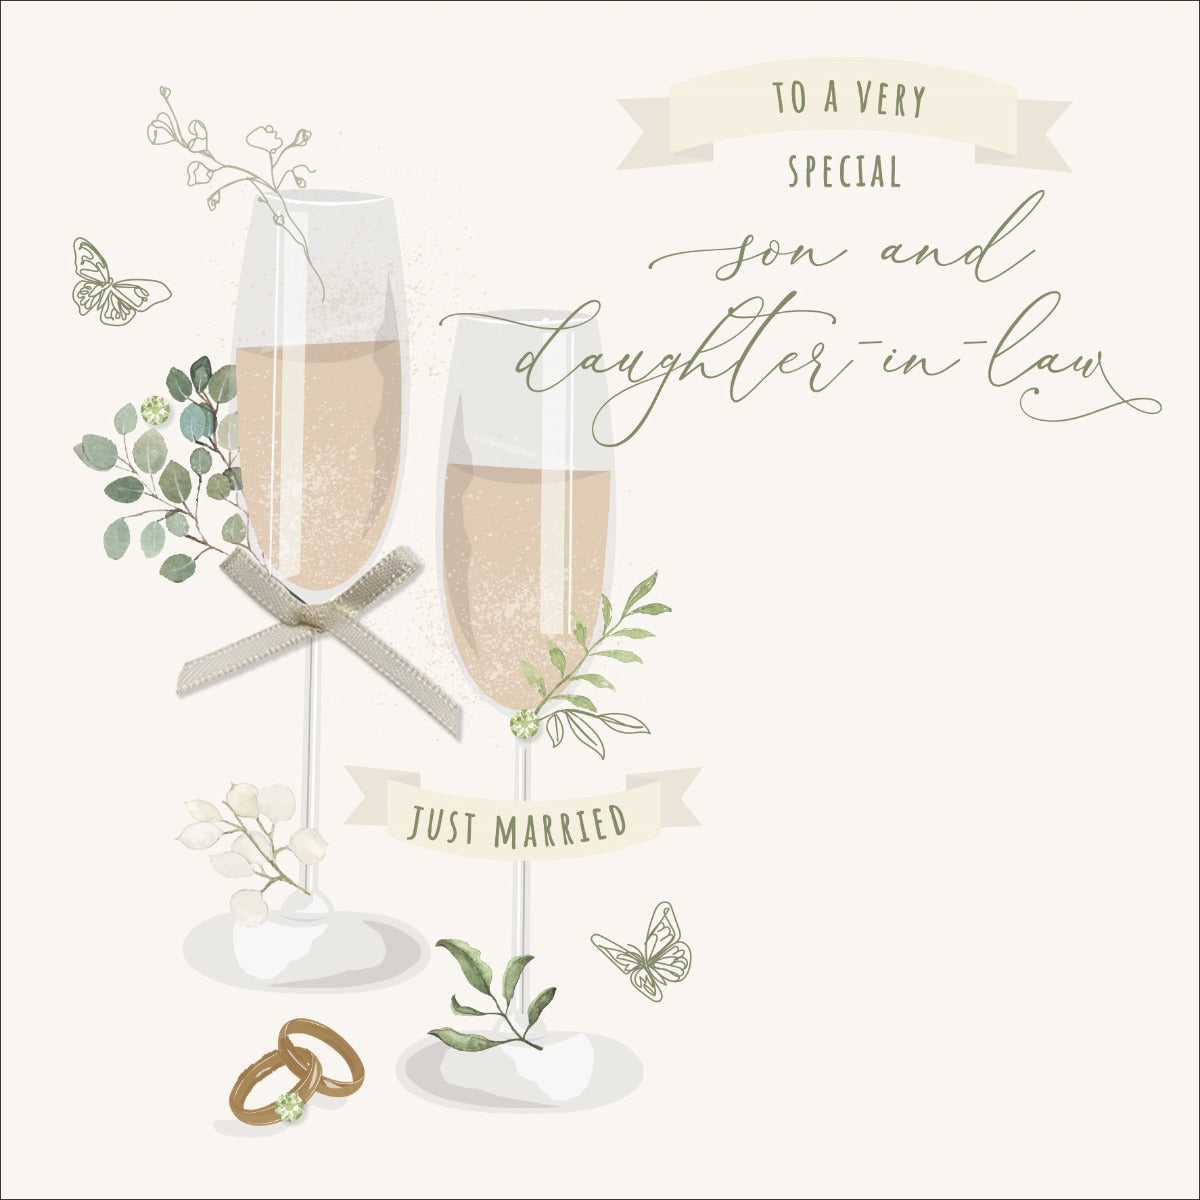 Besotted - Son and Daughter-in-law Wedding Day Card